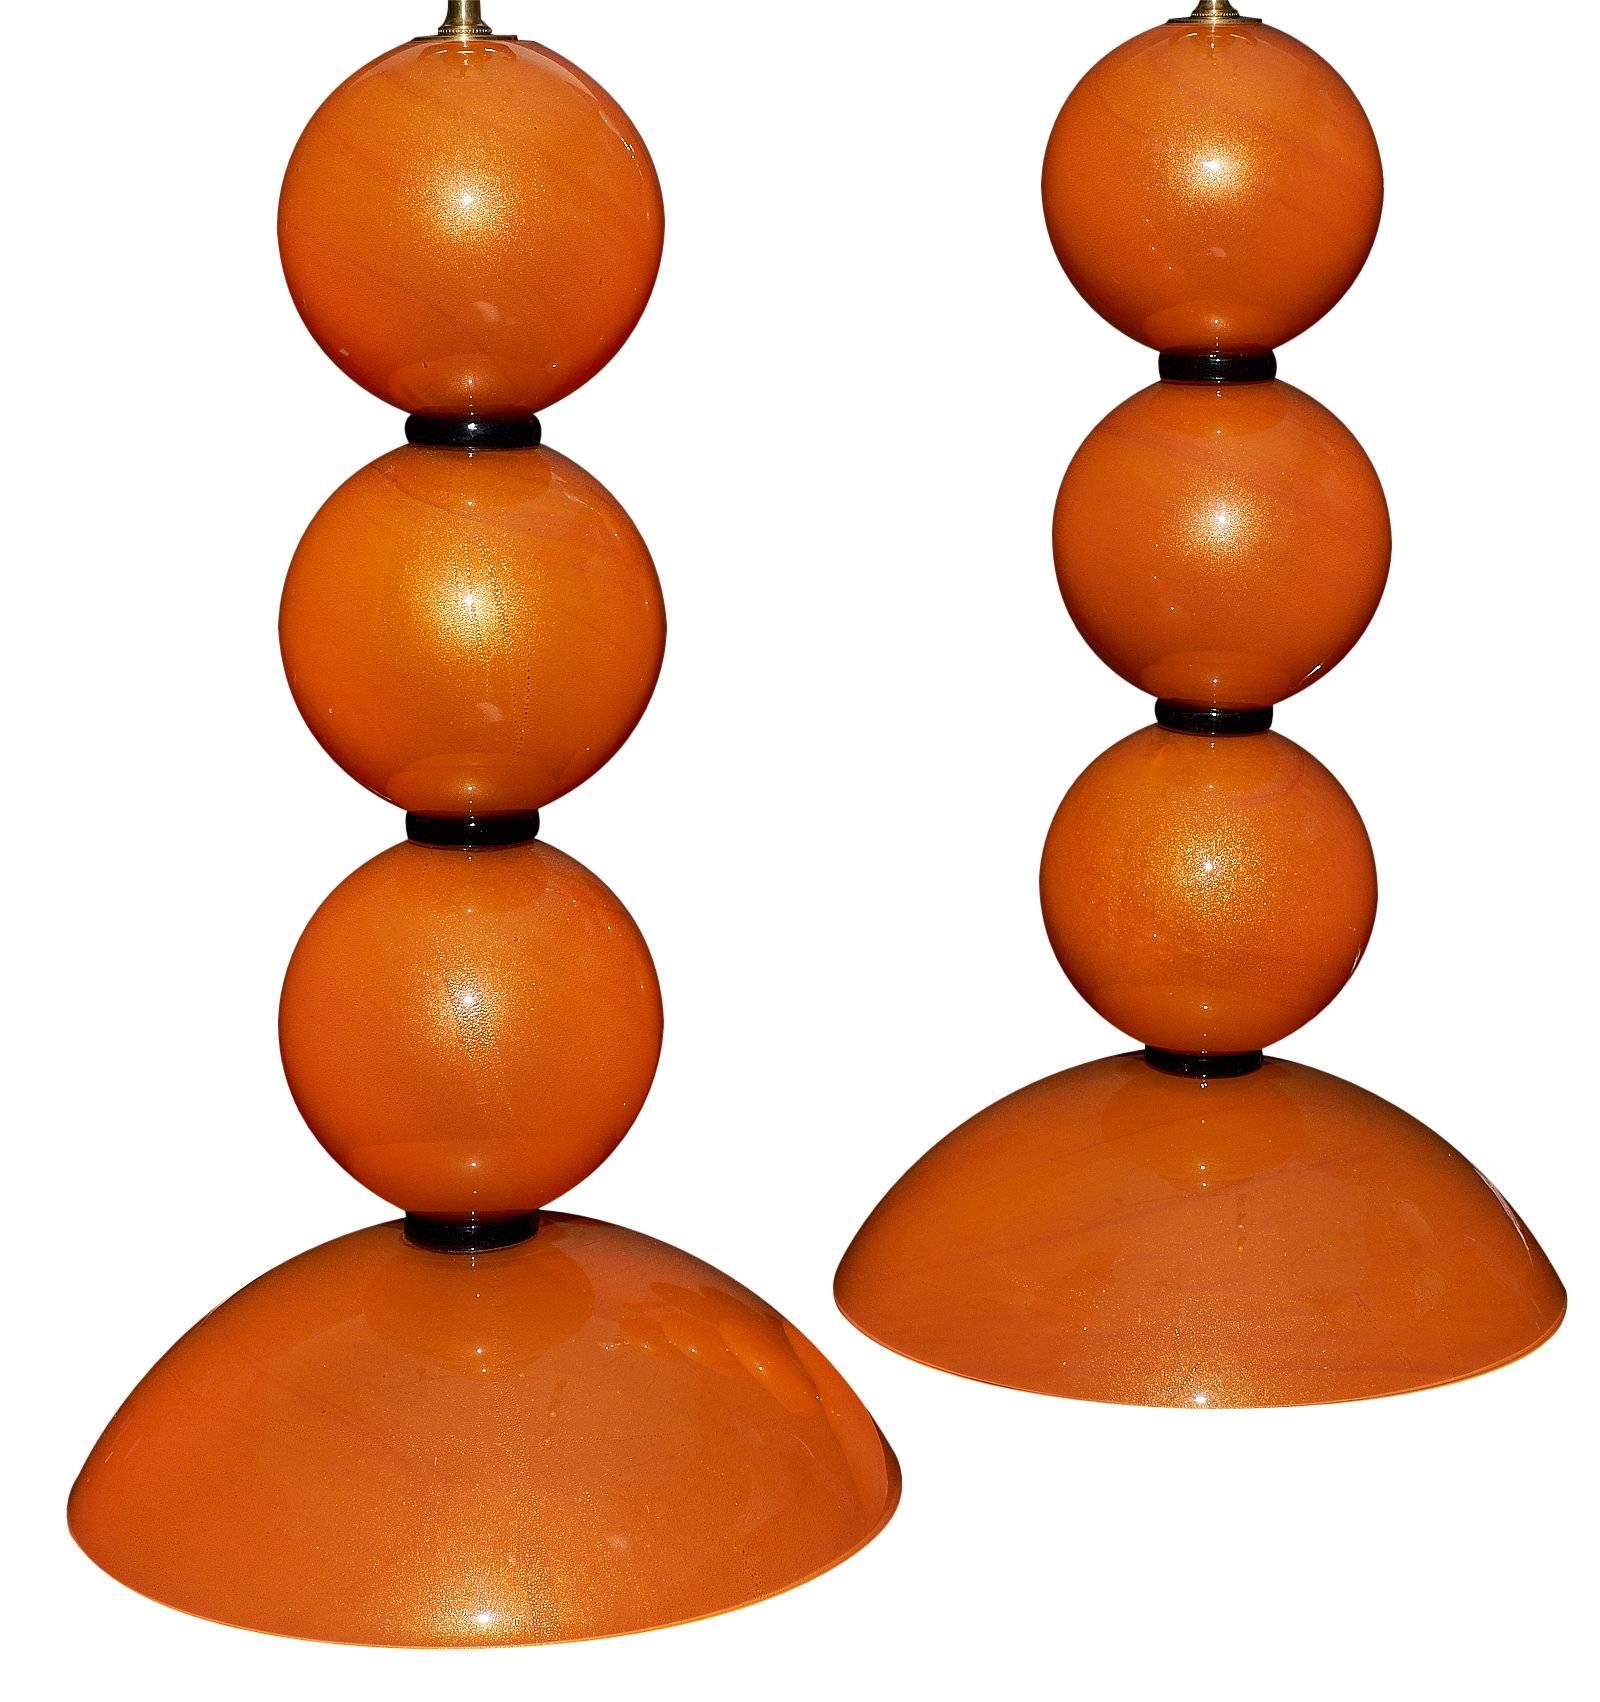 Stunning orange handblown glass lamps by A Dona in Murano. This pair as an exquisite, bright color and gold flecked throughout. They have been wired to fit US standards.

This pair is currently located at our dealer's warehouse in Italy. Please